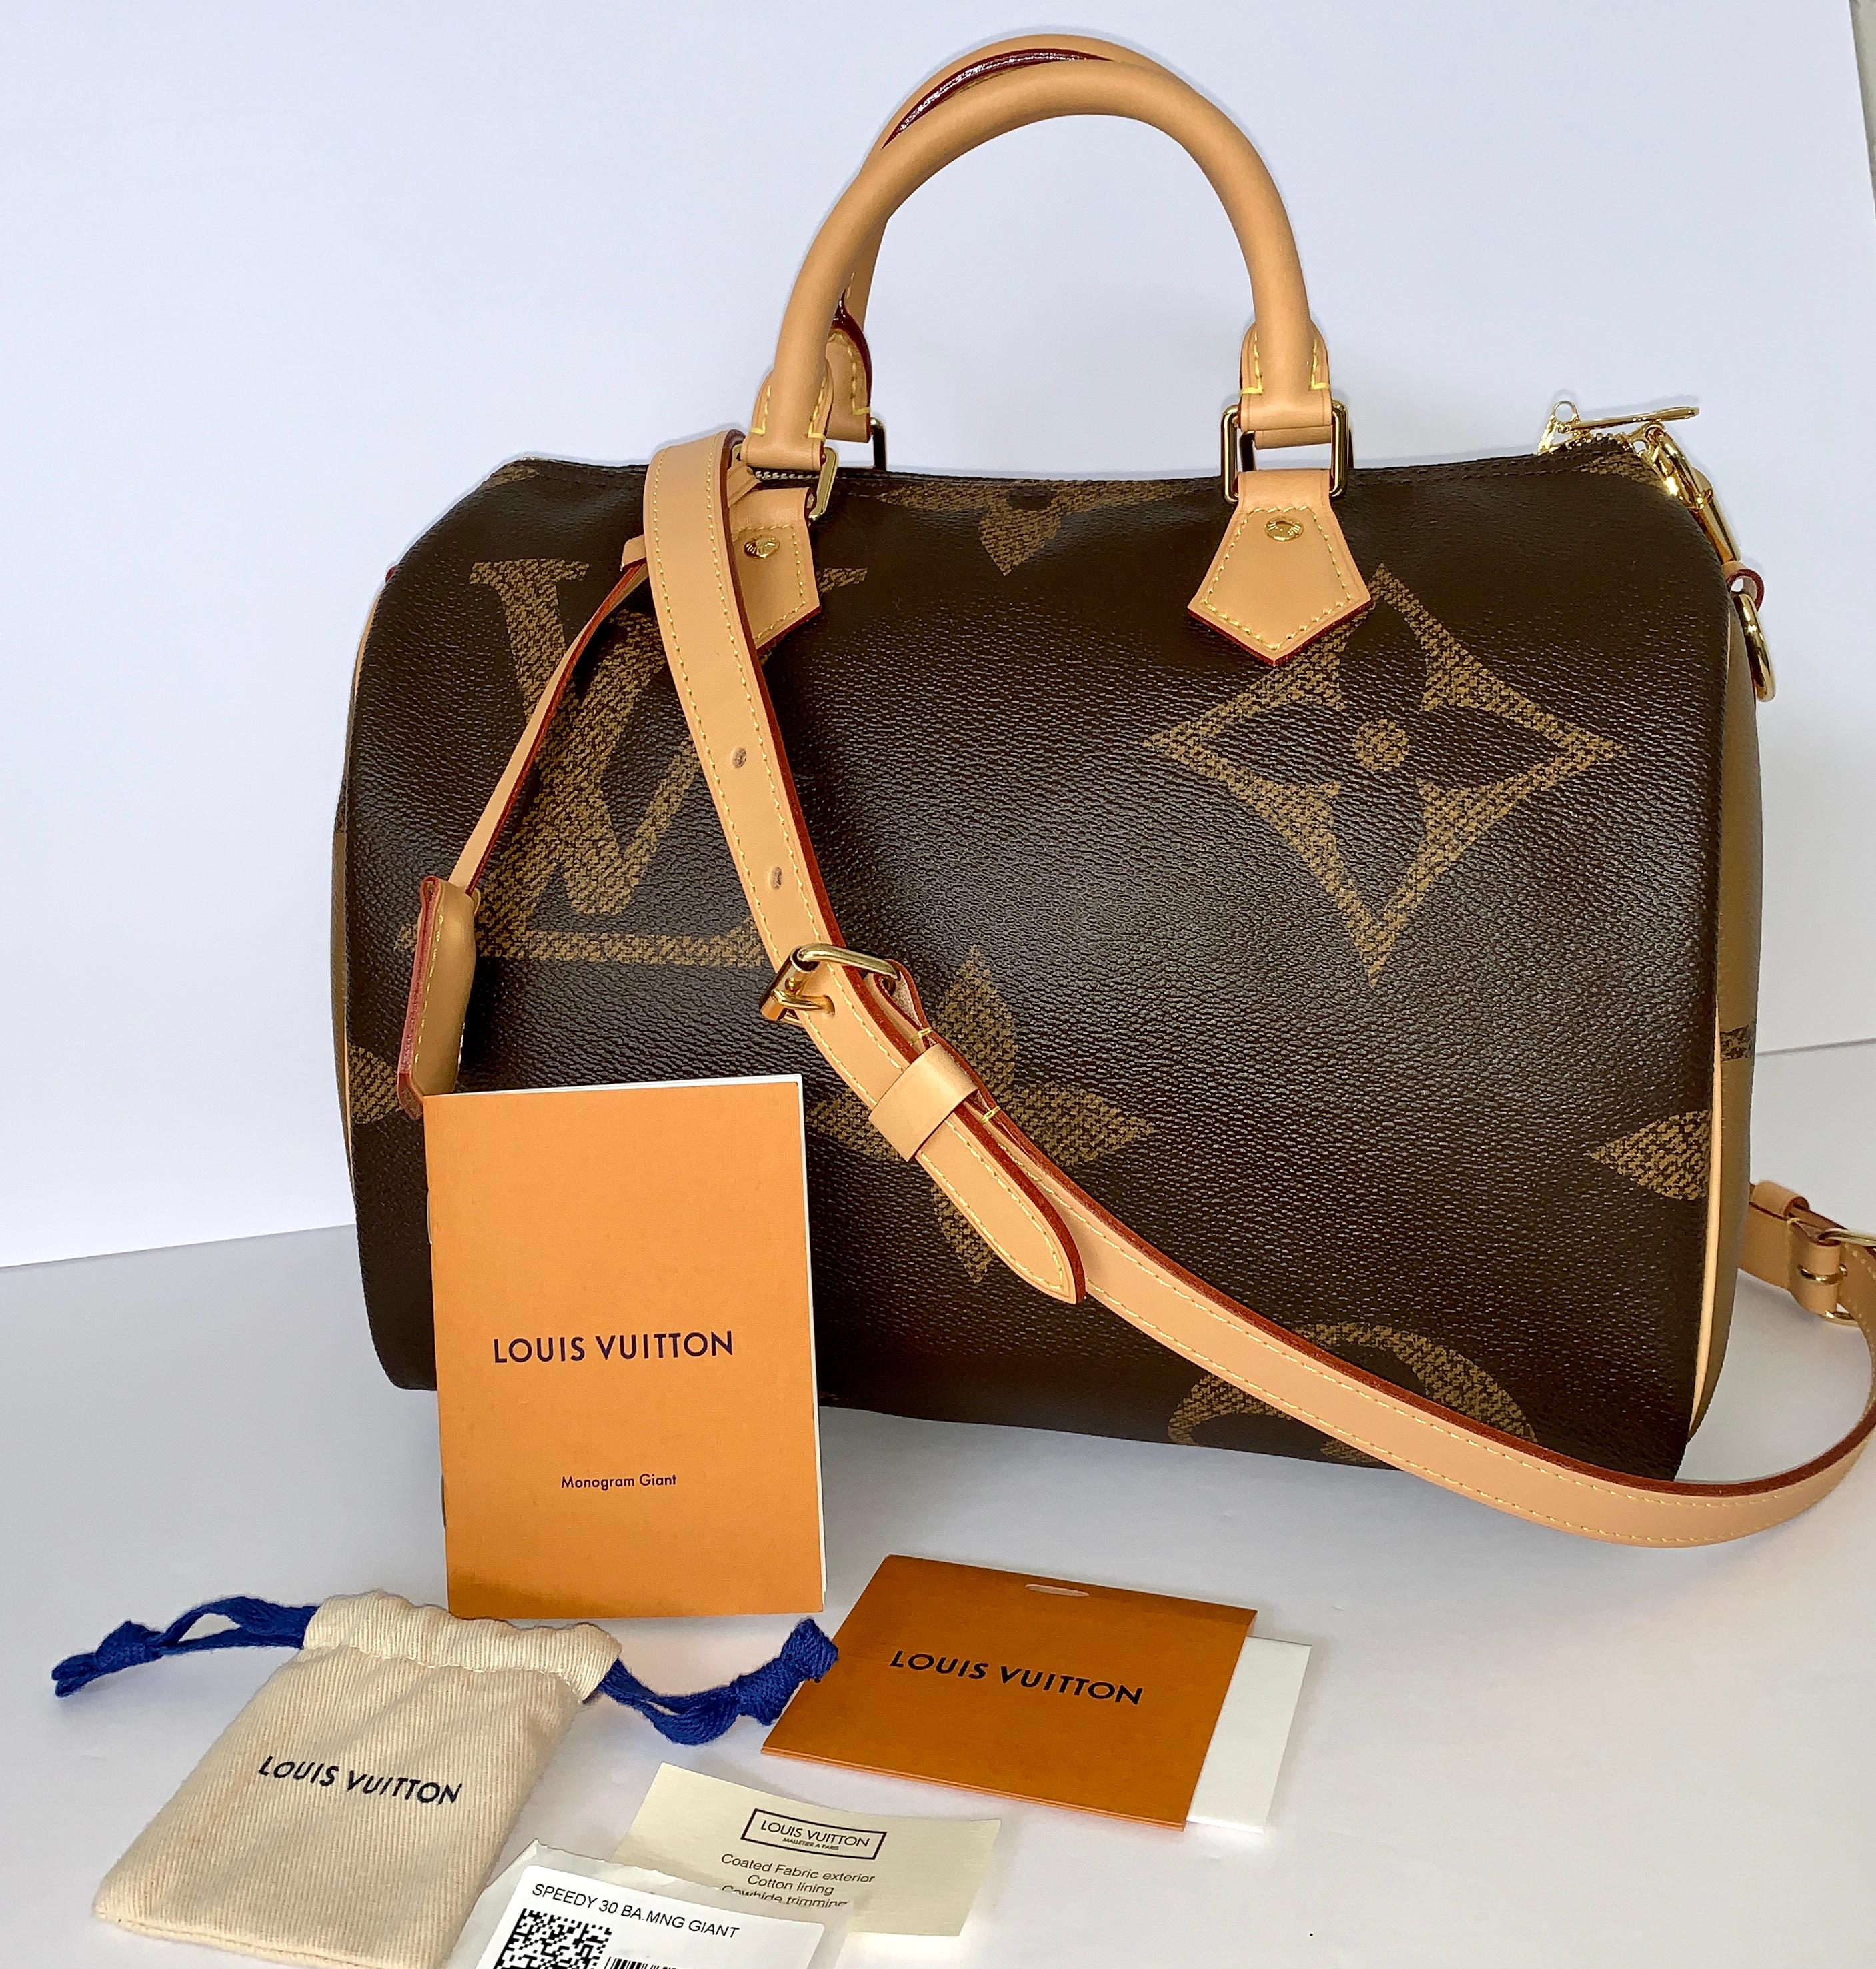 Louis Vuitton 
Iconic Speedy
Now in Giant Monogram Reverse
What a great bag!
Size is 30
 

16.14 x 13.39 x 7.48 inches 
(Length x Height x Width) 
L 16.1 x H 13.4 x W 7.5 inches
Monogram coated canvas
Monogram coated canvas trim
Textile